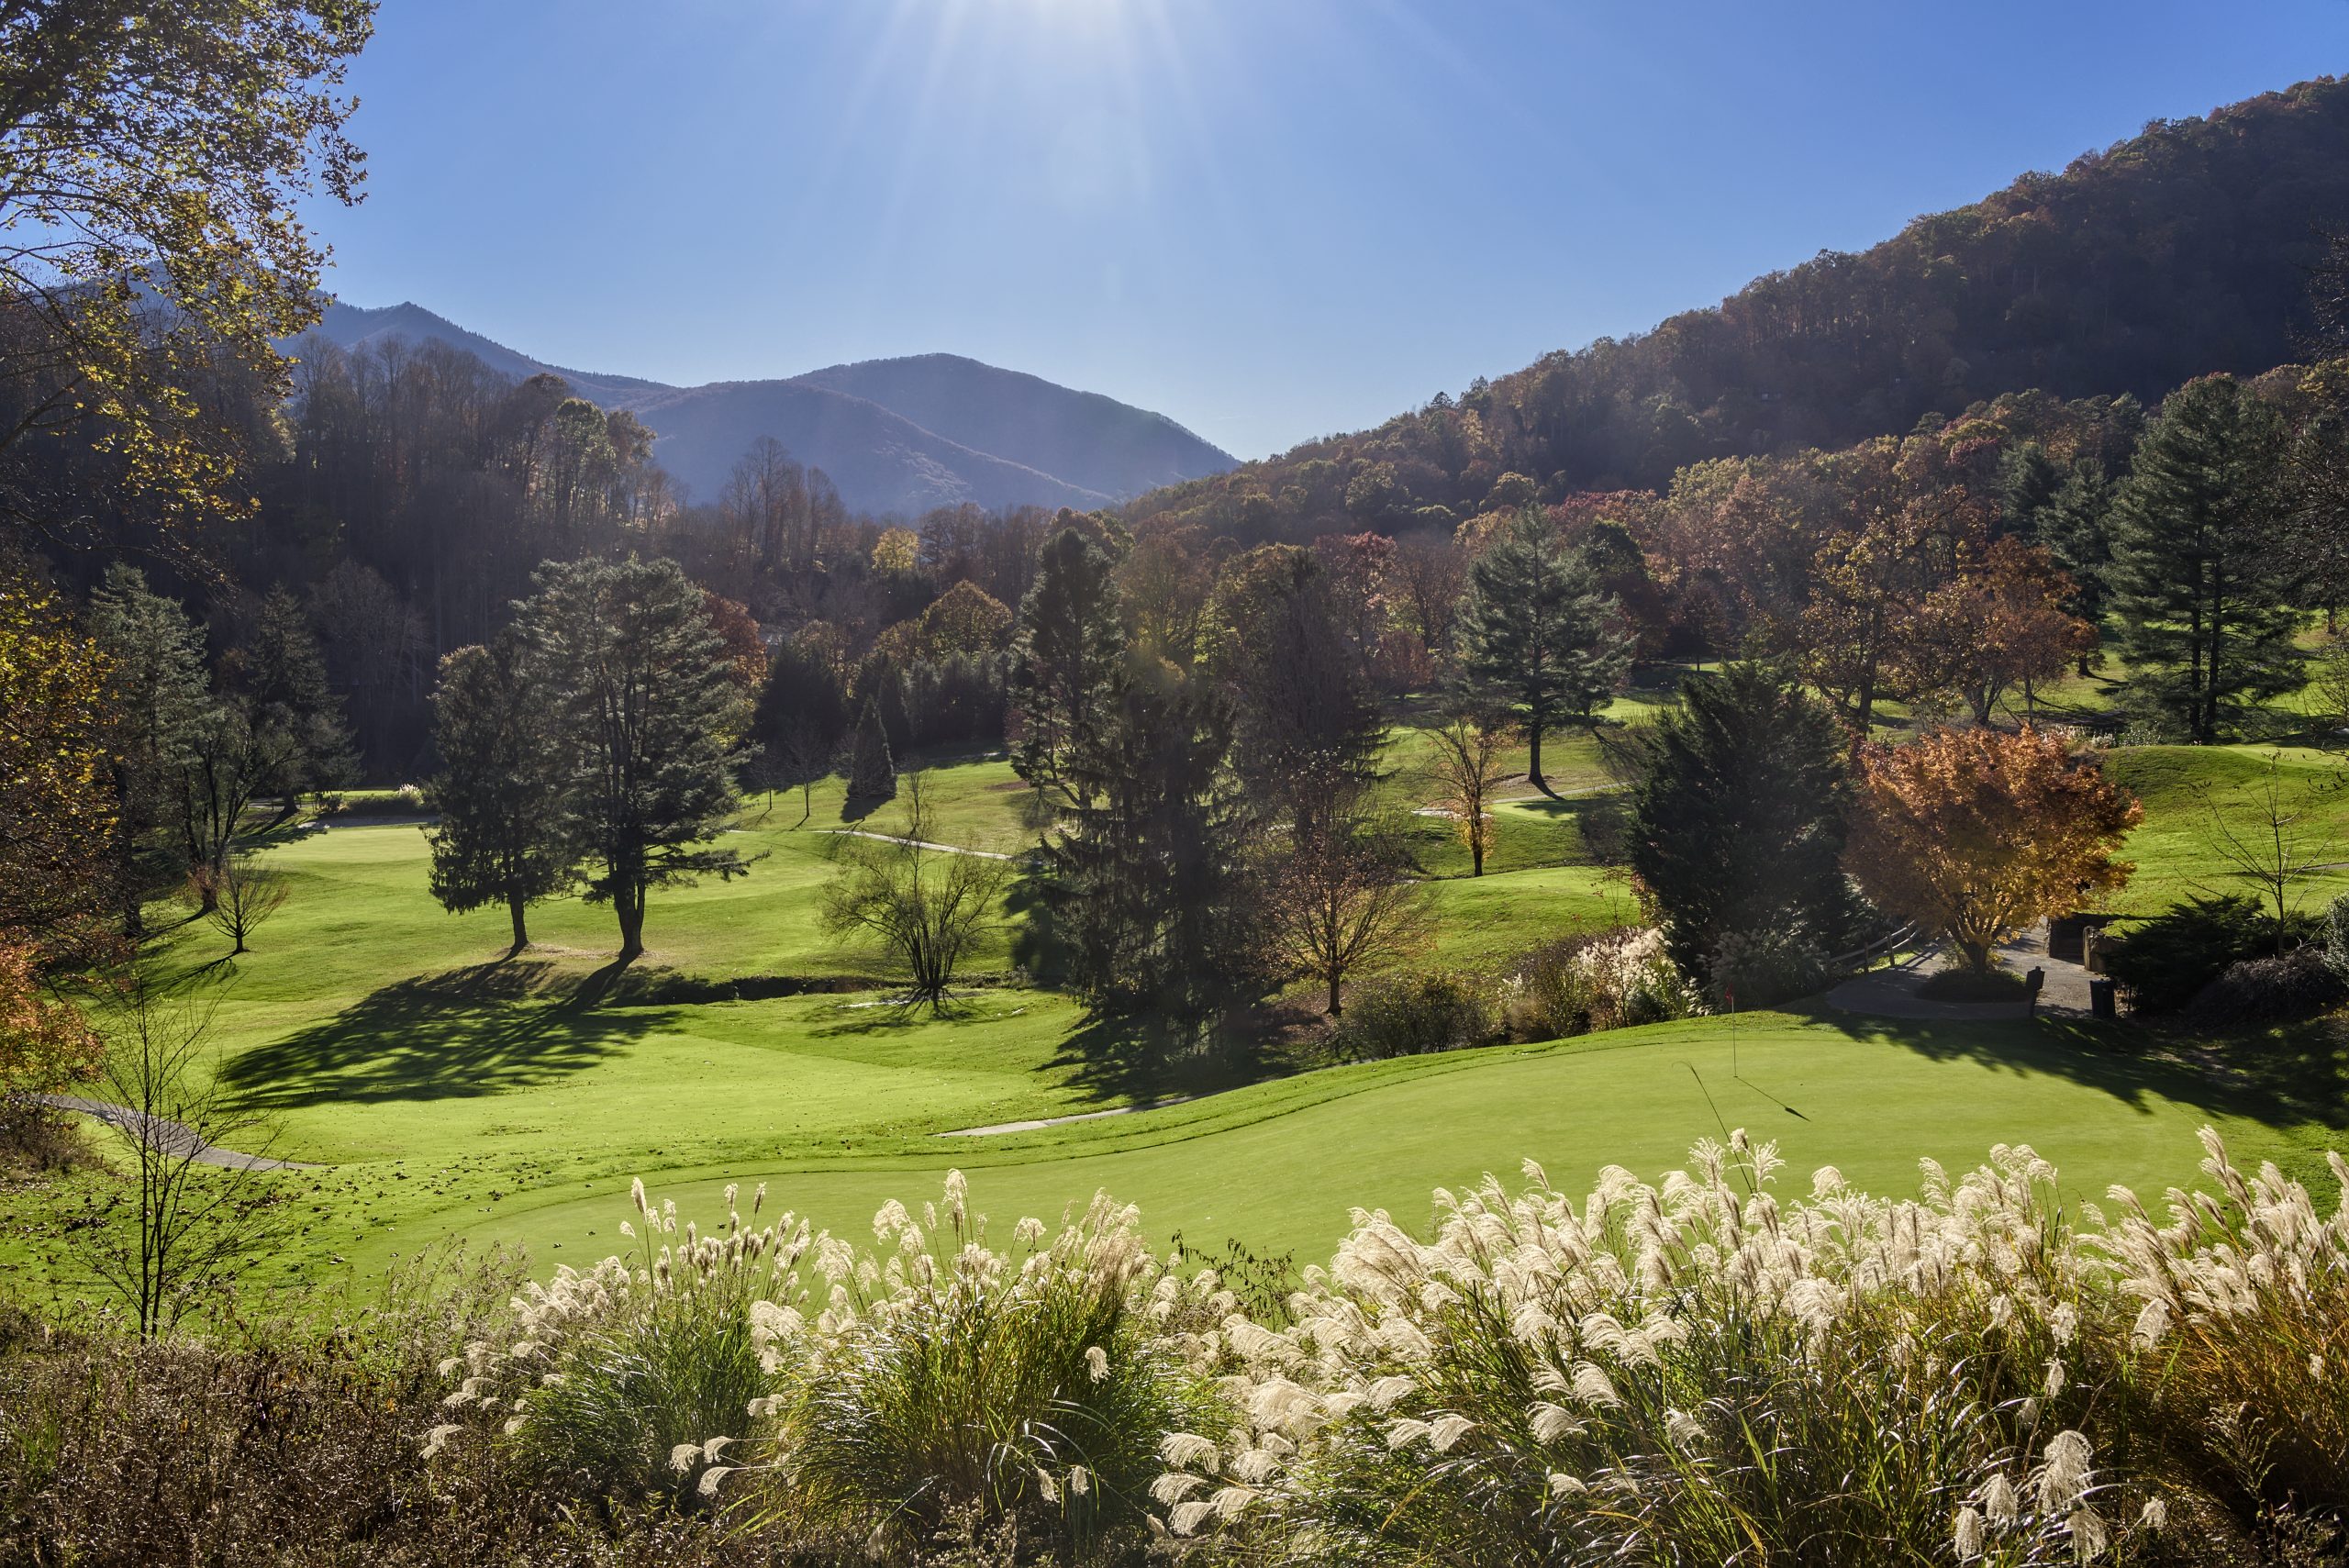 Hilly golf course in autumn in North Carolina